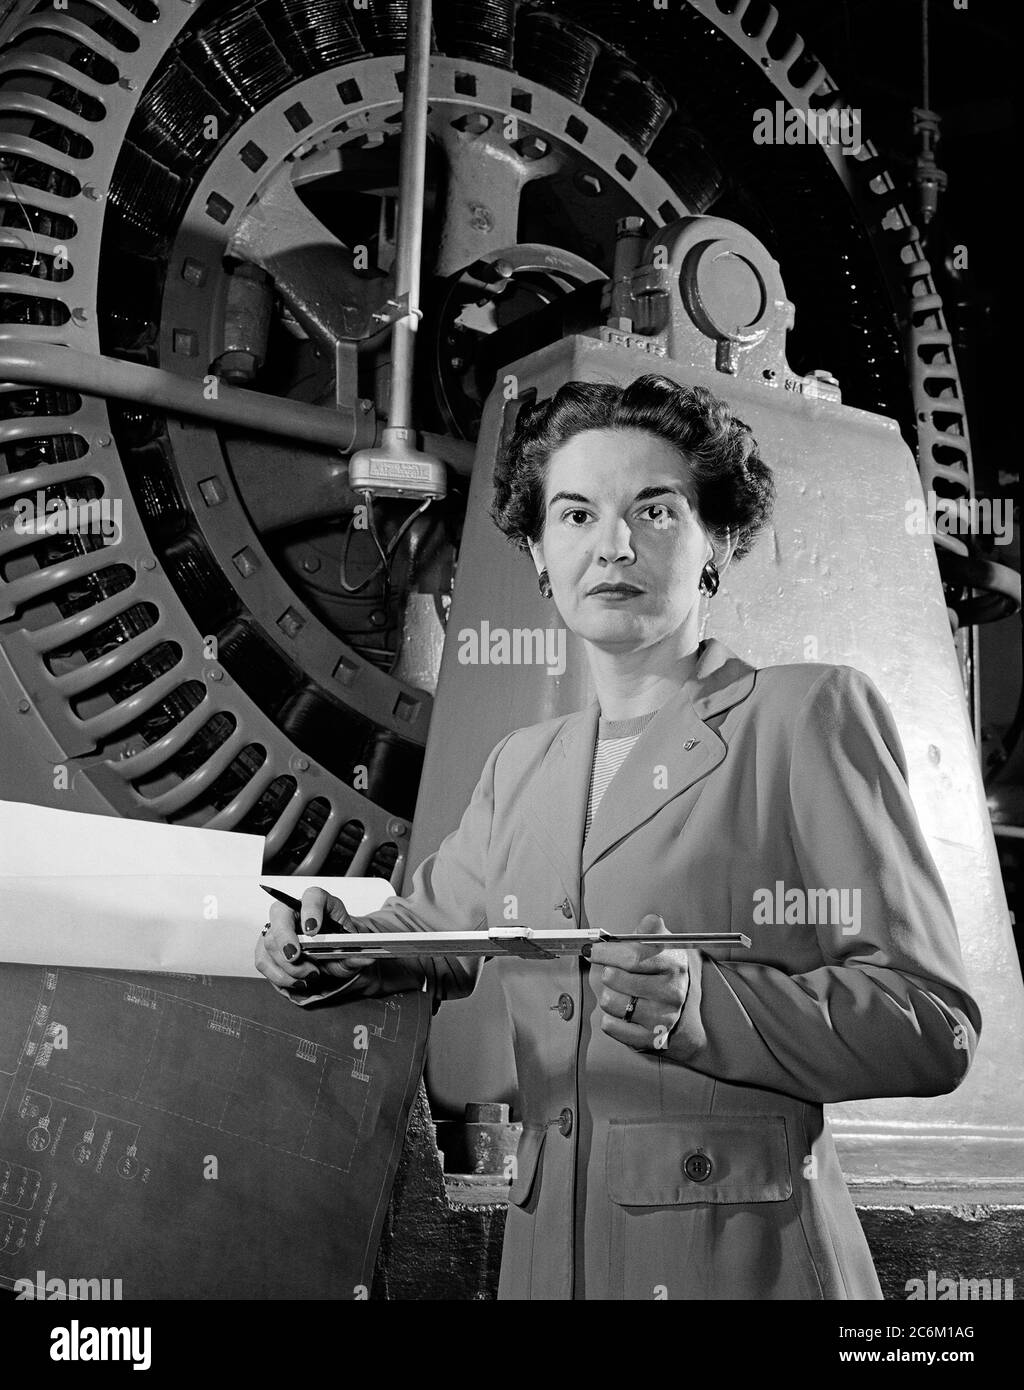 1952 , USA : The american Electrical Engineer woman KITTY Wingfield O'BRIEN JOYNER ( 1916 - 1993 ) of NASA ,  at work , expert in Electronics , at LANGLEY RESEARCH CENTER .  In this photo analyzing the operation of a wind tunnel turbine at NACA Langley in 1952 . Remembered like the first woman engineer at the Memorial Langley Aeronautical Laboratory . - NASA - N.A.S.A. - The National Aeronautics and Space Administration - foto storiche - foto storica  - scienziato - scientist  - INGEGNERE  DONNA  - INGEGNERIA ELETTRONICA - DONNE DONNA - AL LAVORO - AERONAUTICA - REGOLO MATEMATICO ALGEBRICO LOG Stock Photo